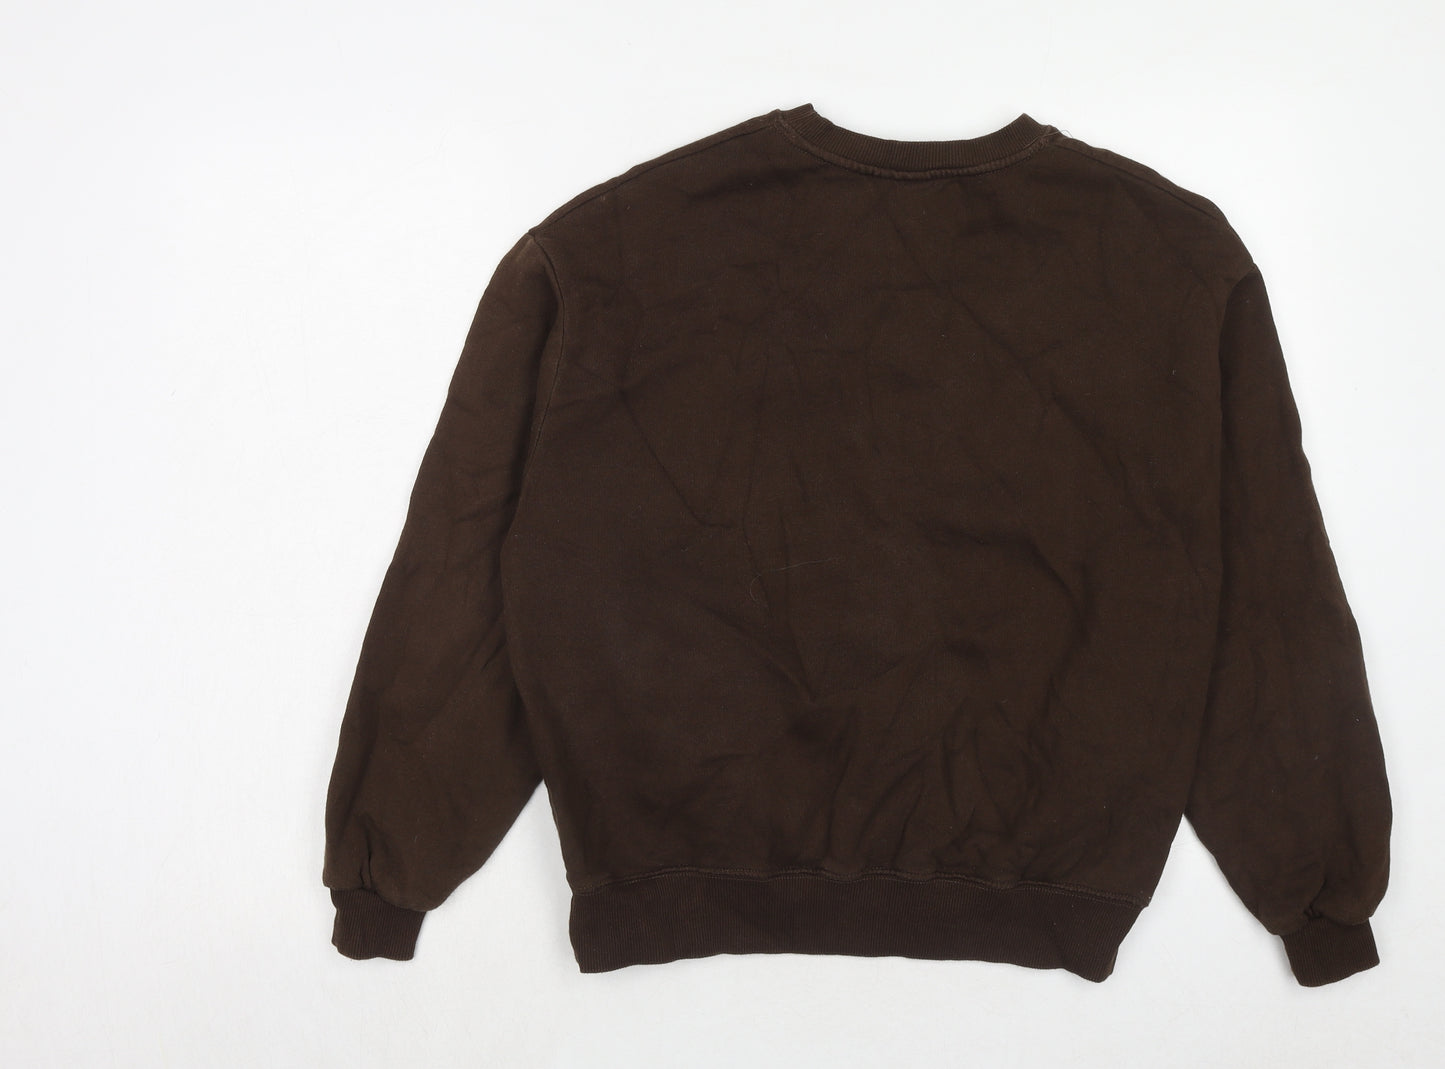 Pull&Bear Womens Brown Cotton Pullover Sweatshirt Size S Pullover